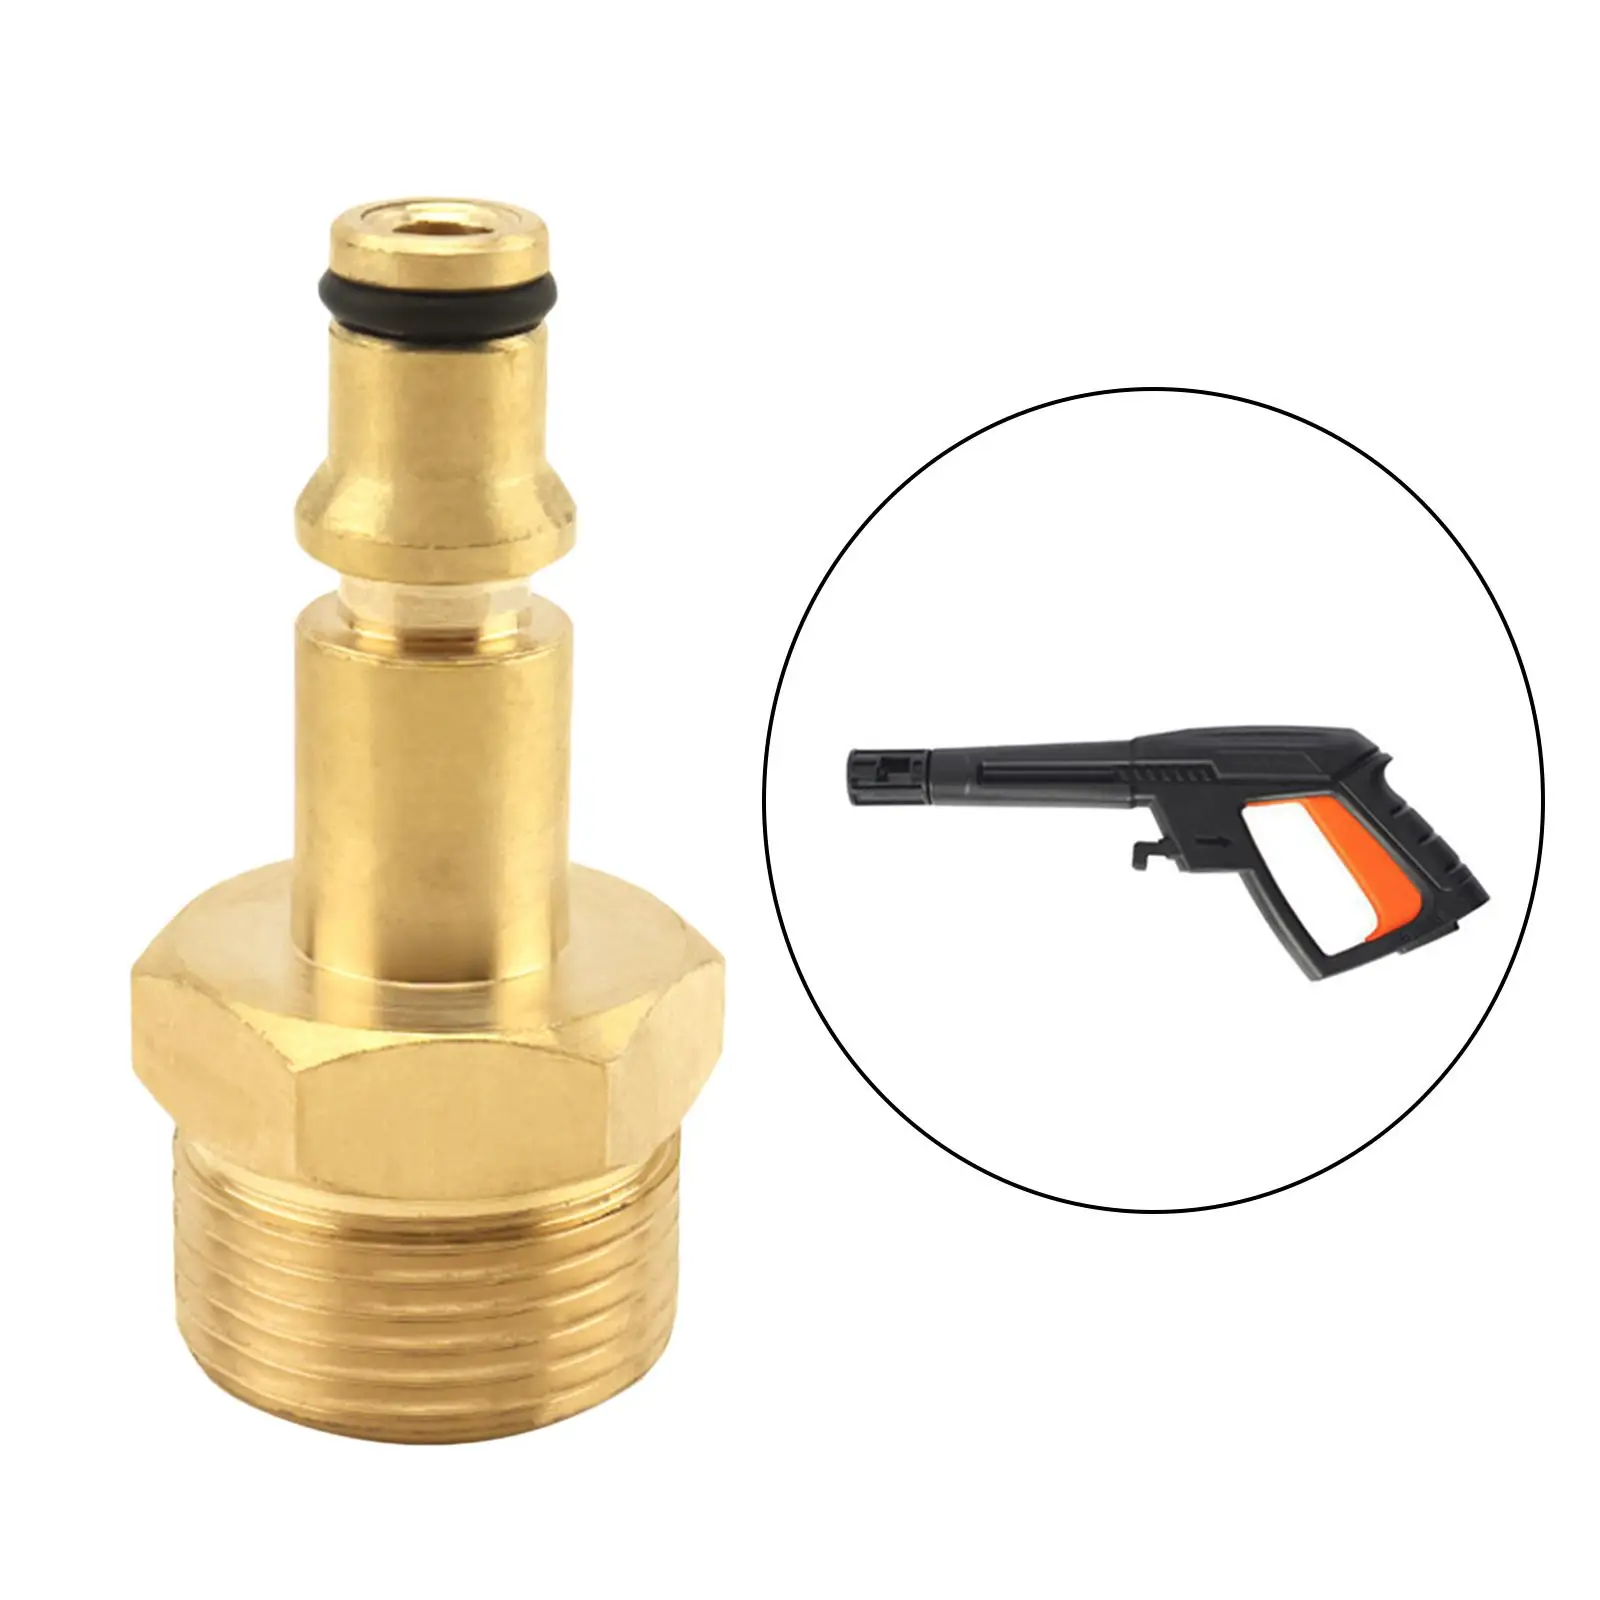 Hose Adapter Brass Fittings Hose Repair Kit Convert Joint Cleaning Kit for Yili Long Pressure Washer Household Car Wash